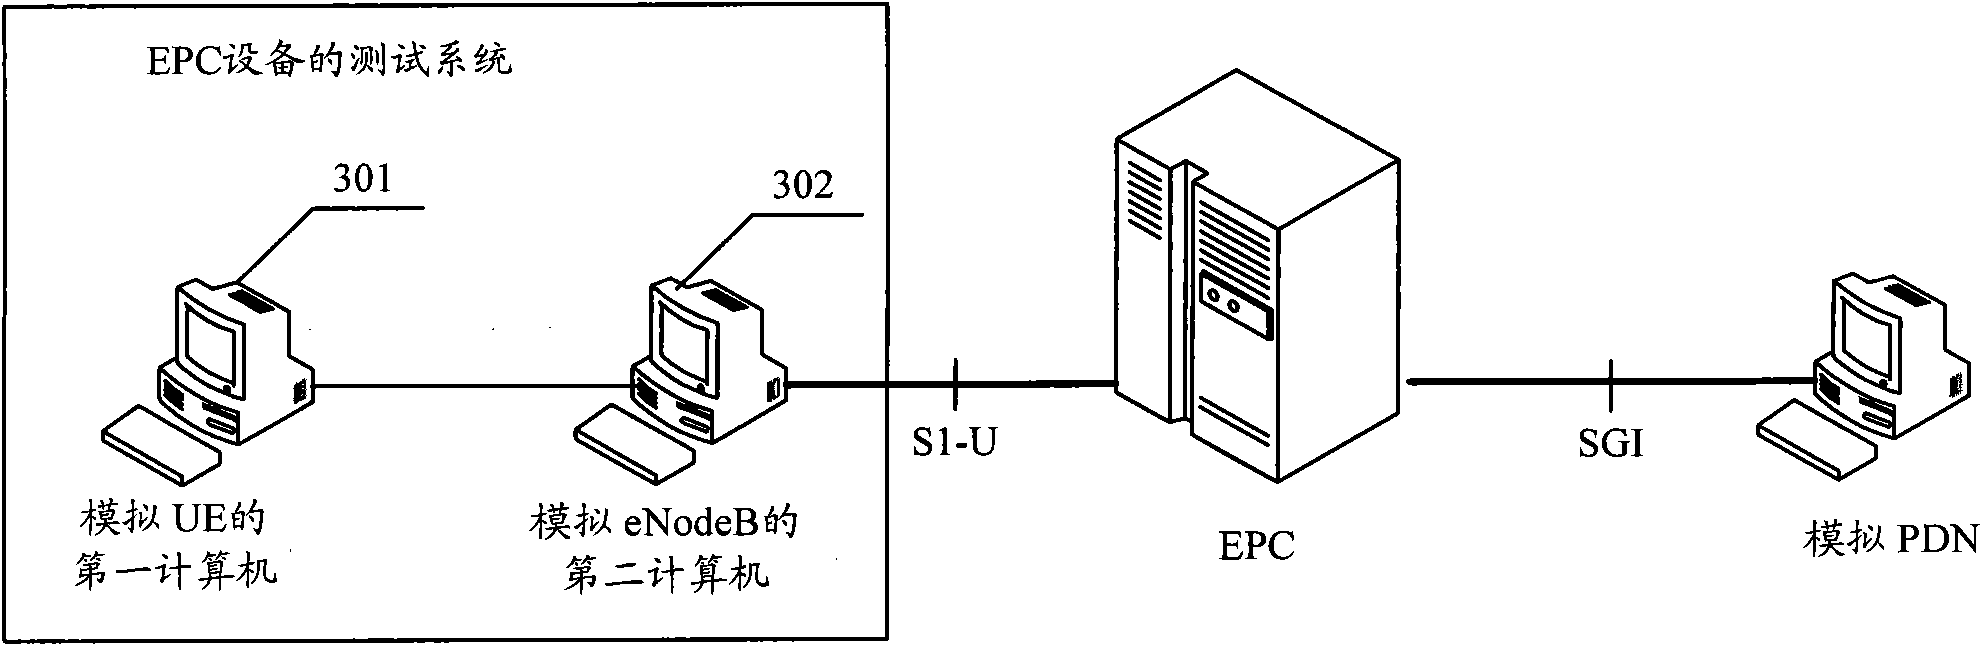 Equipment and method for testing evolved packet core network equipment